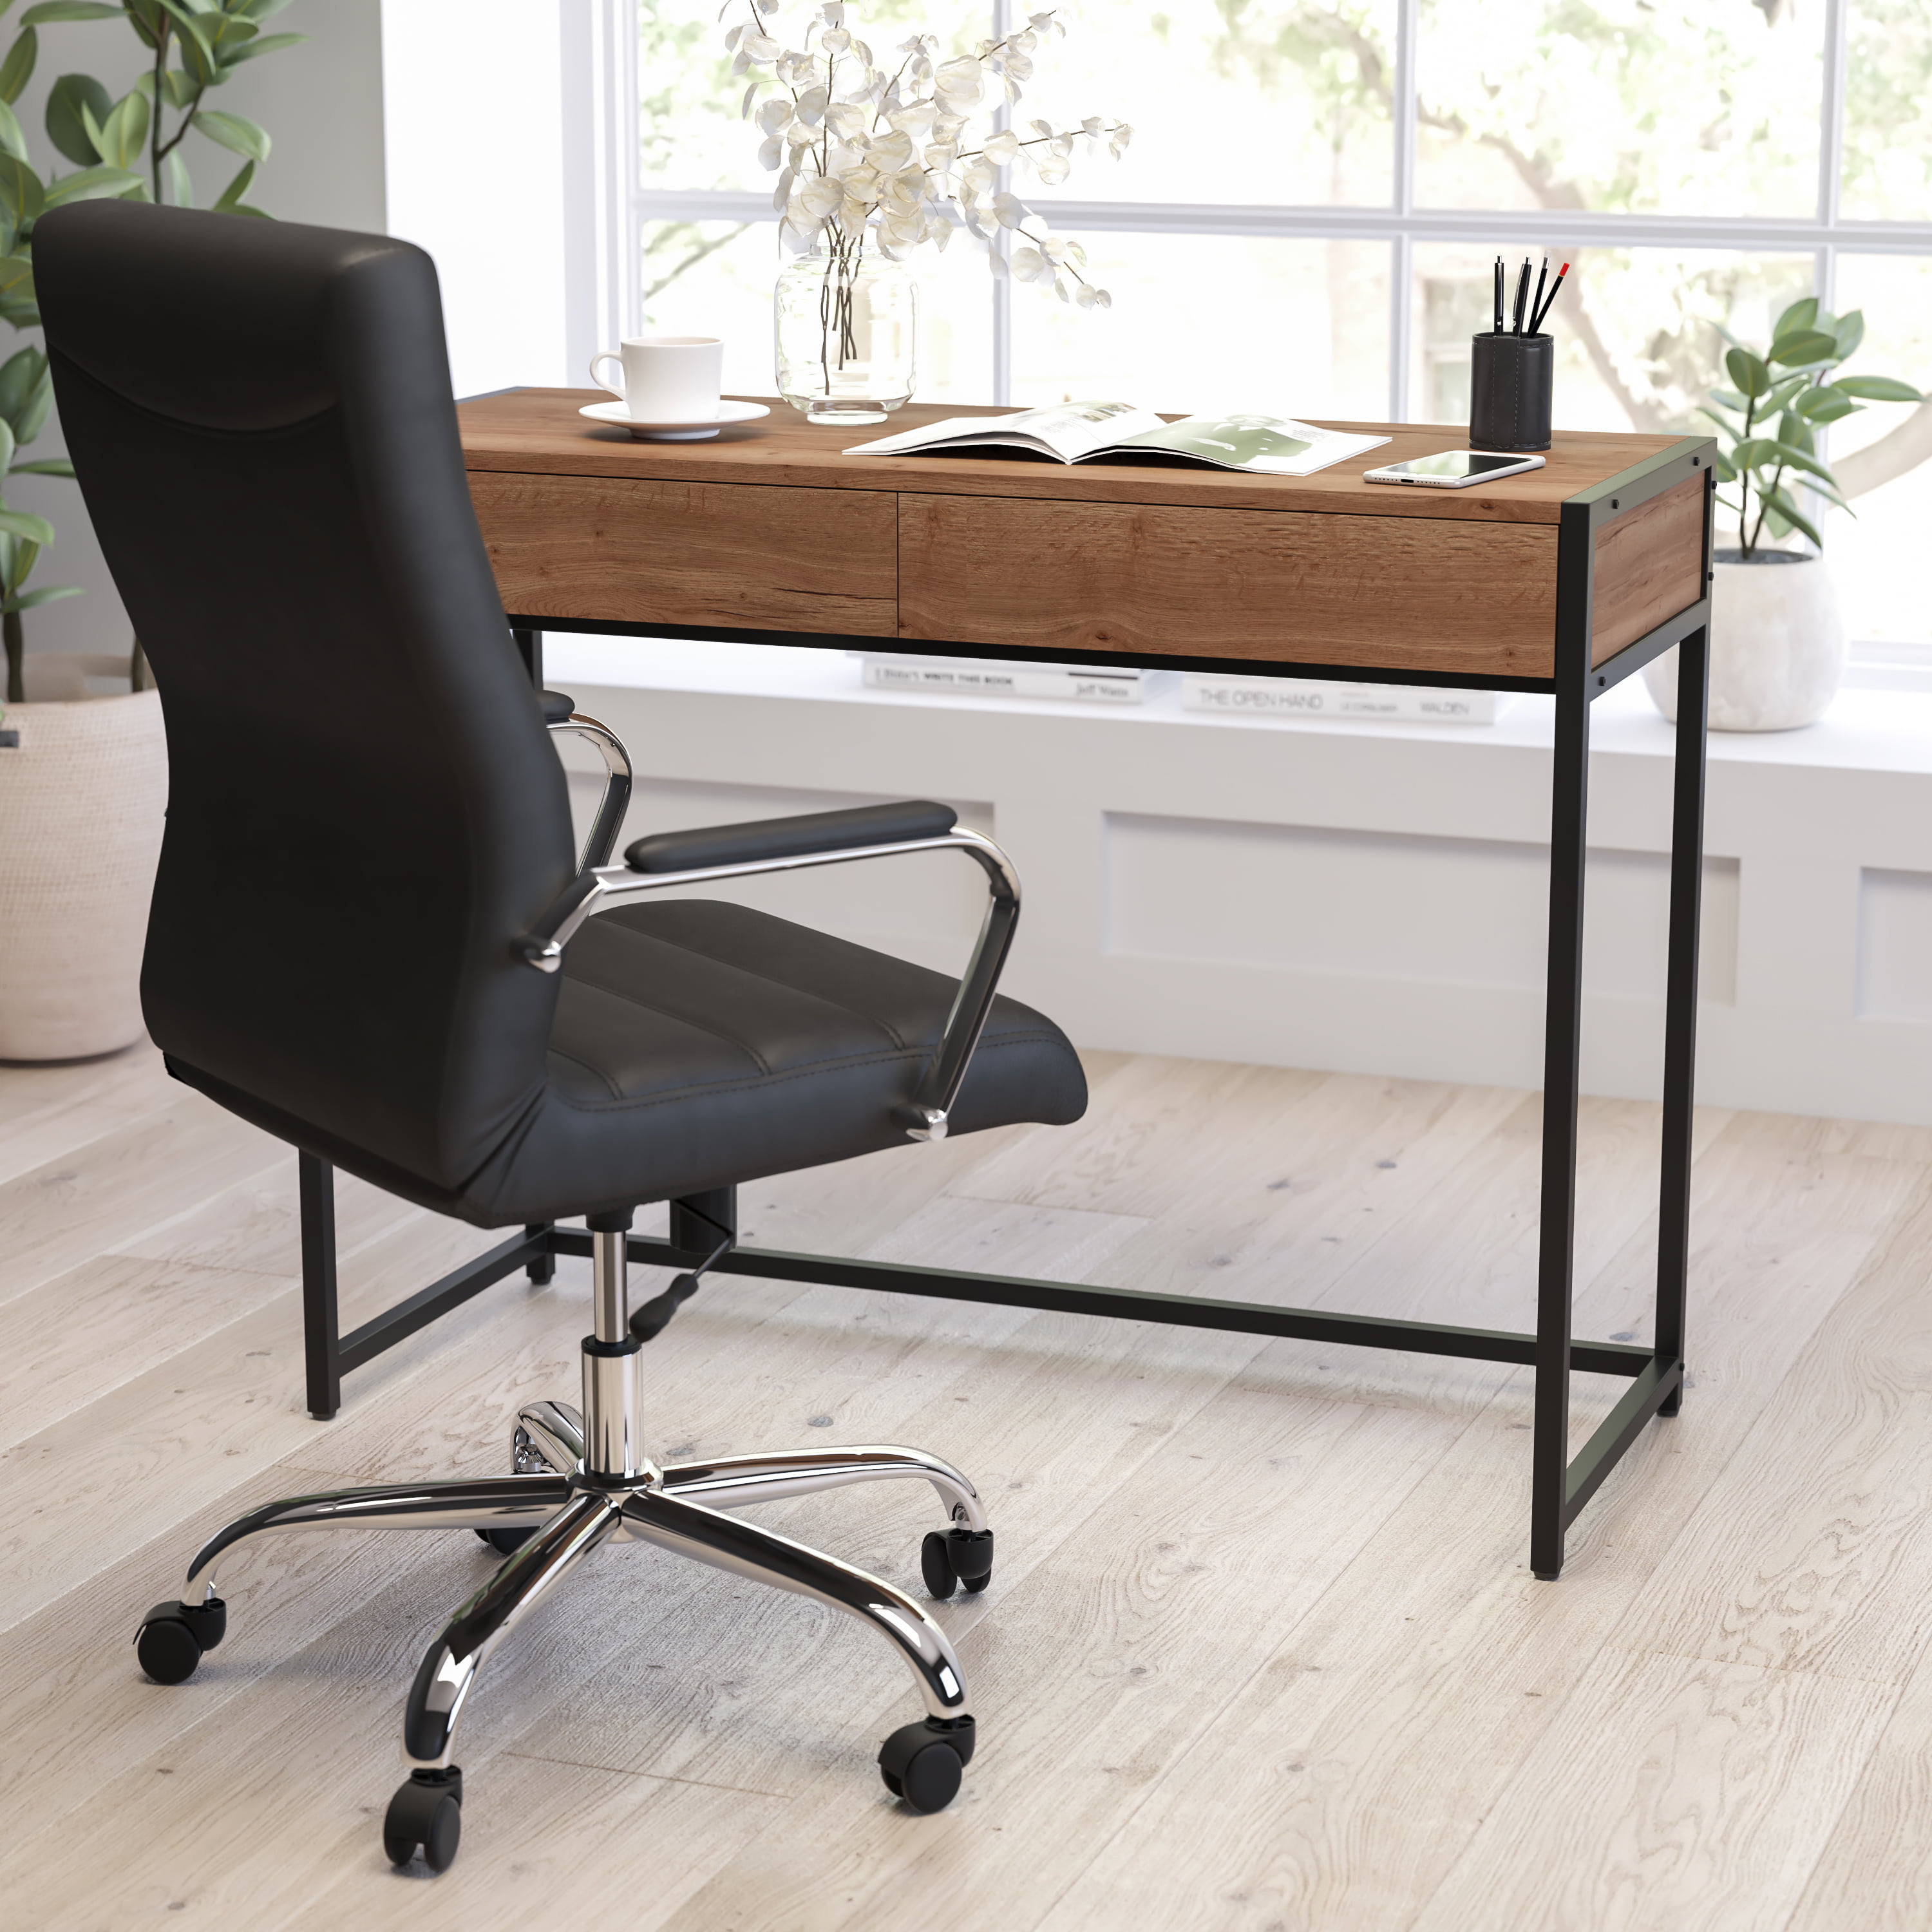 47.2 Rustic Wooden Natural & Black Office Desk with Drawers & Metal Legs, Homary